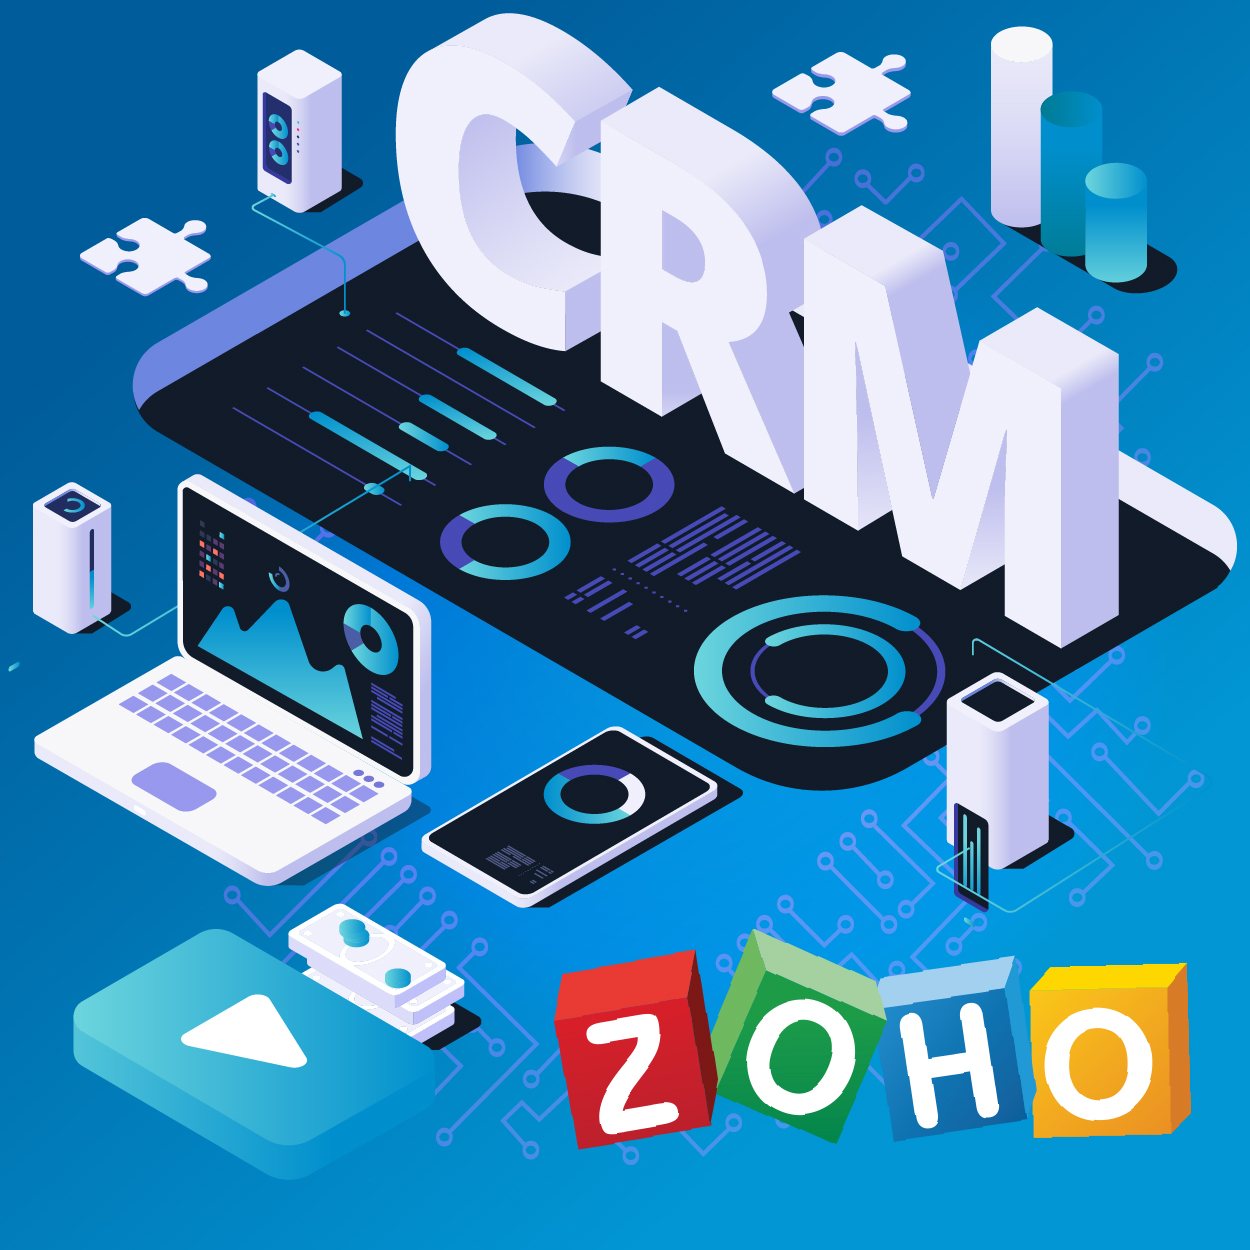 Zoho CRM and 3CX integration via Mr. VoIP tools